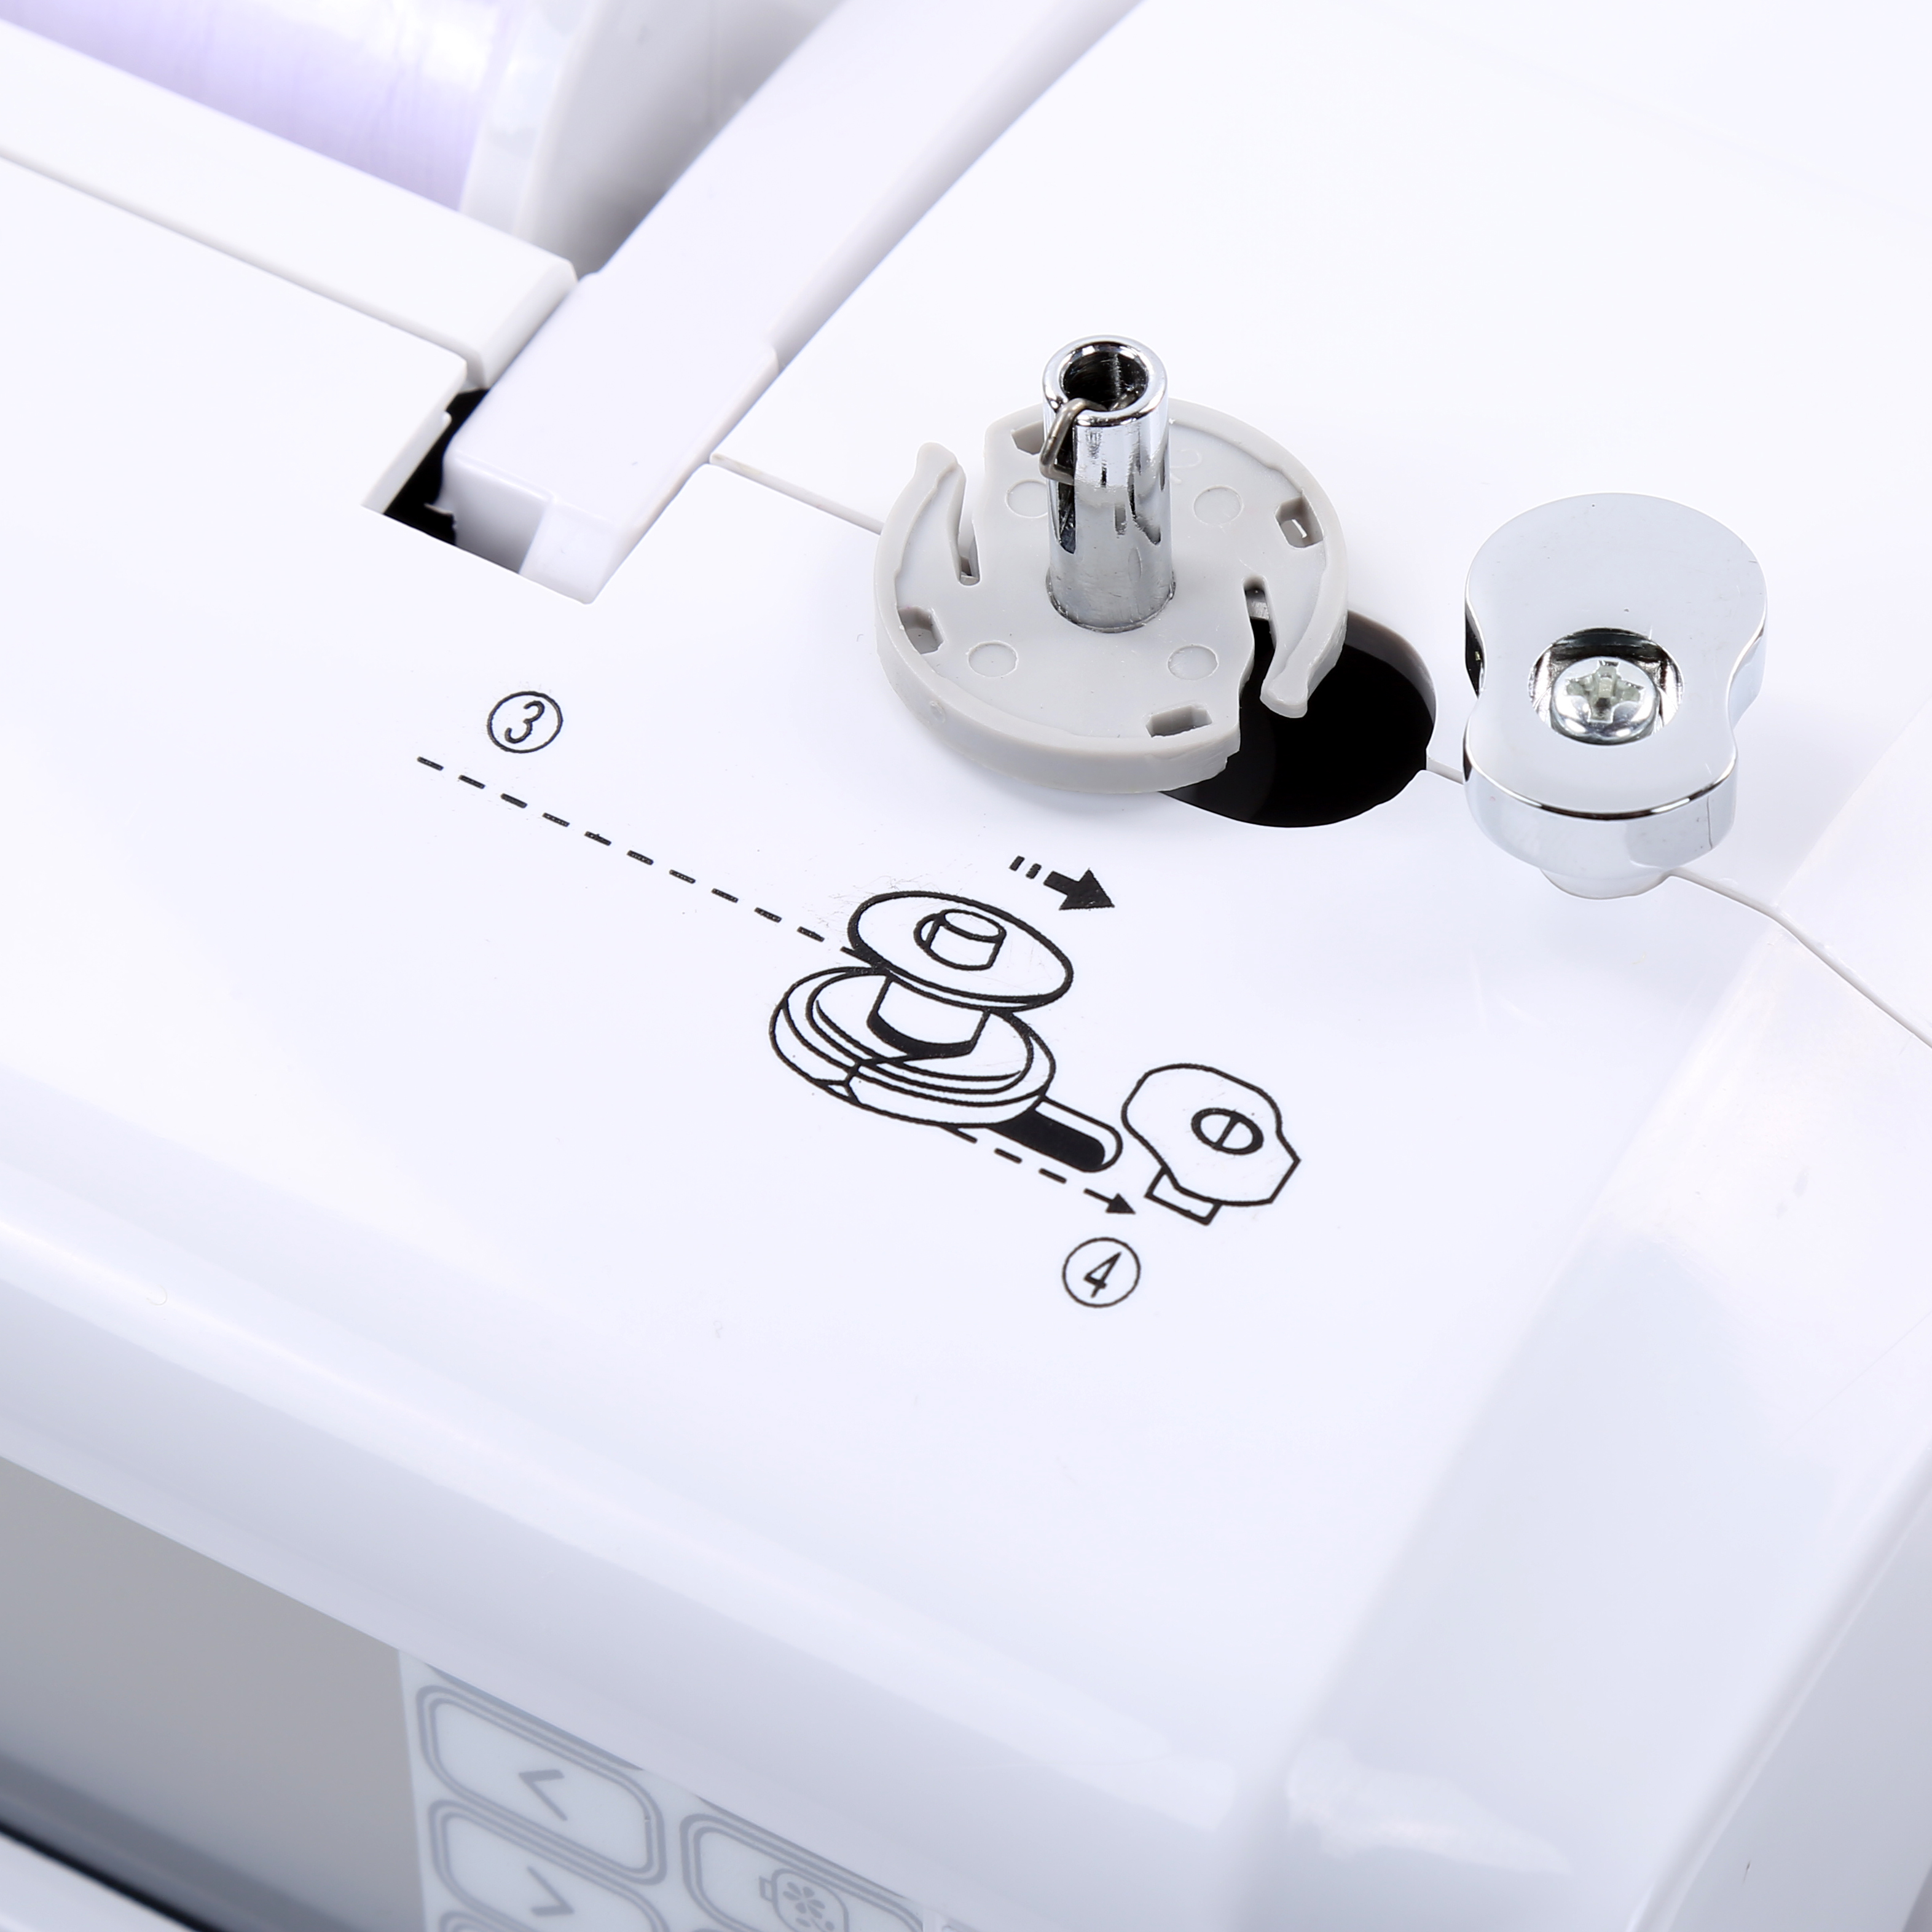 BAI Hand Automatic Sewing Machine Portable Brother Se1900 Embroidery Sewing Machine